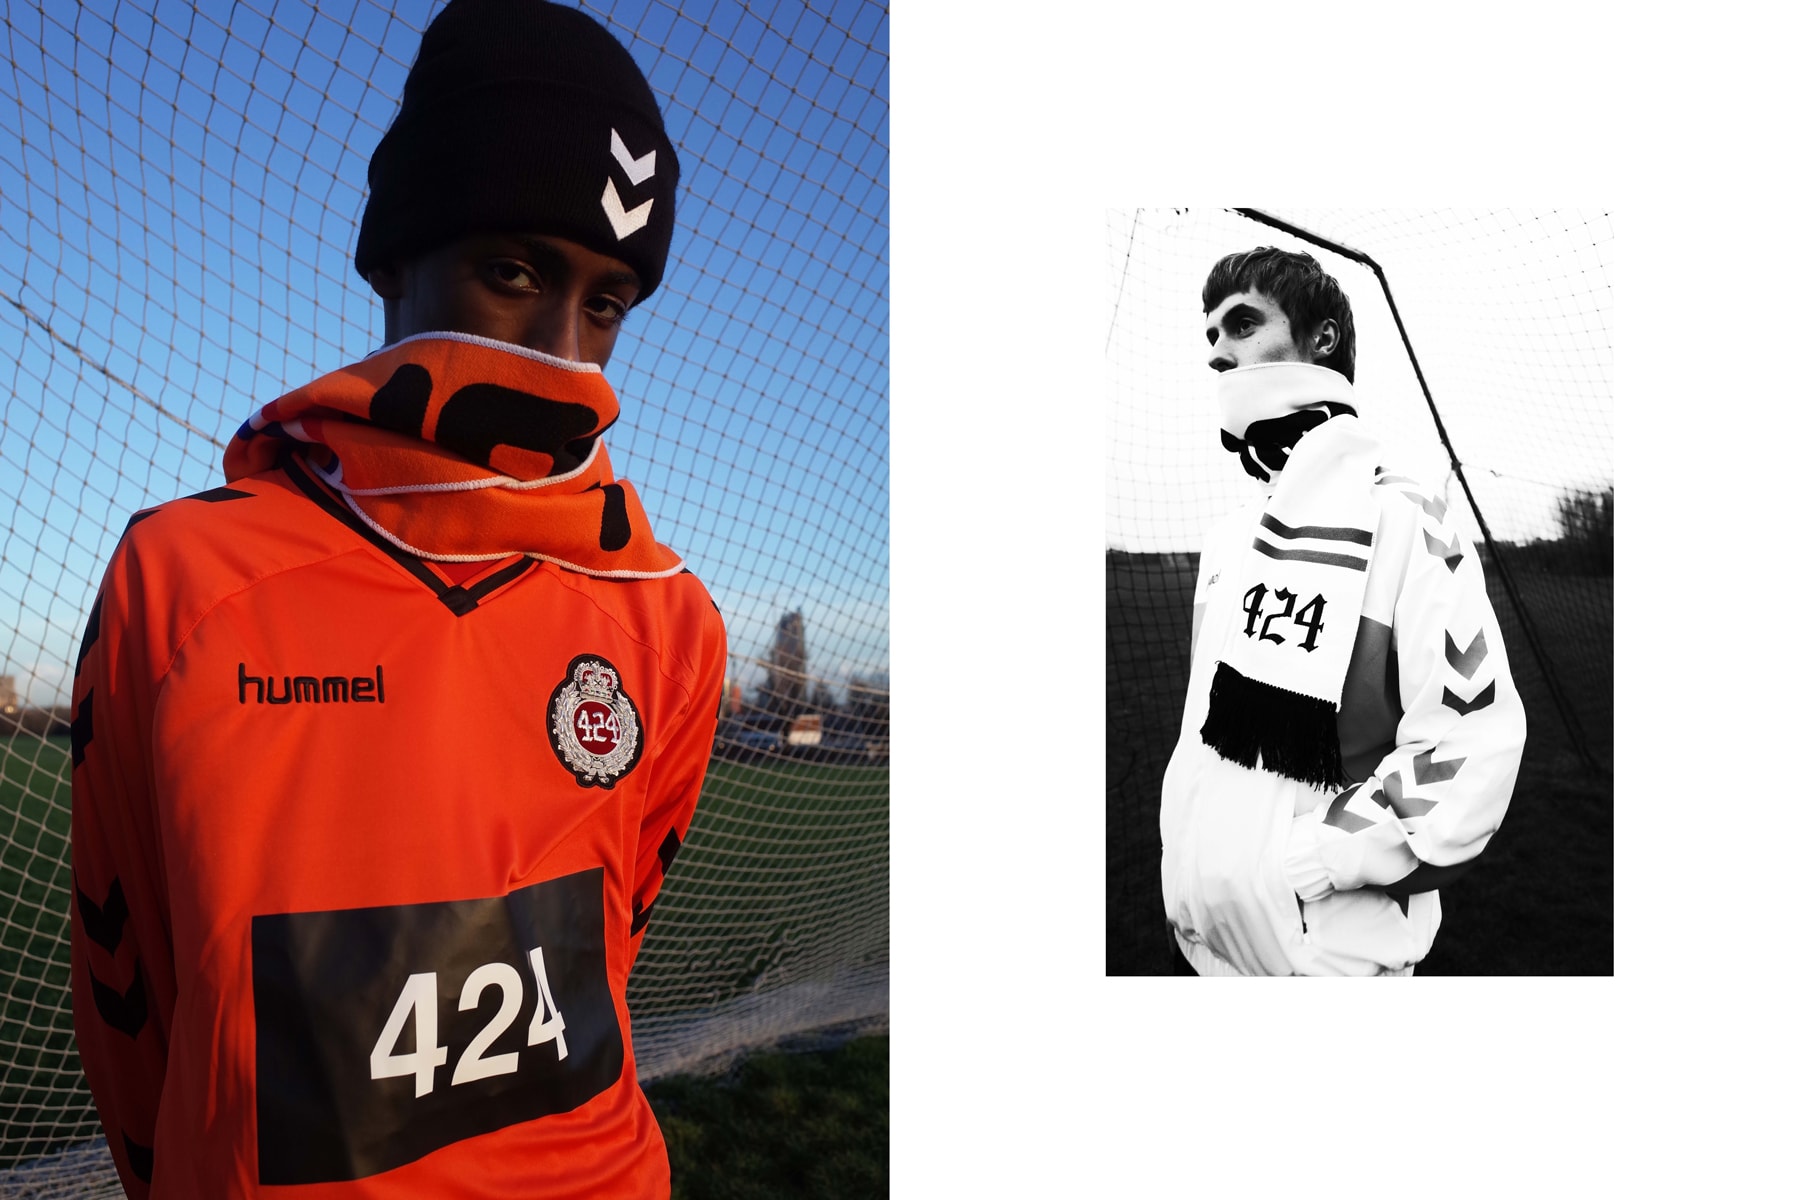 hummel x 424 Team Soccer 1st Capsule Collection | Hypebeast